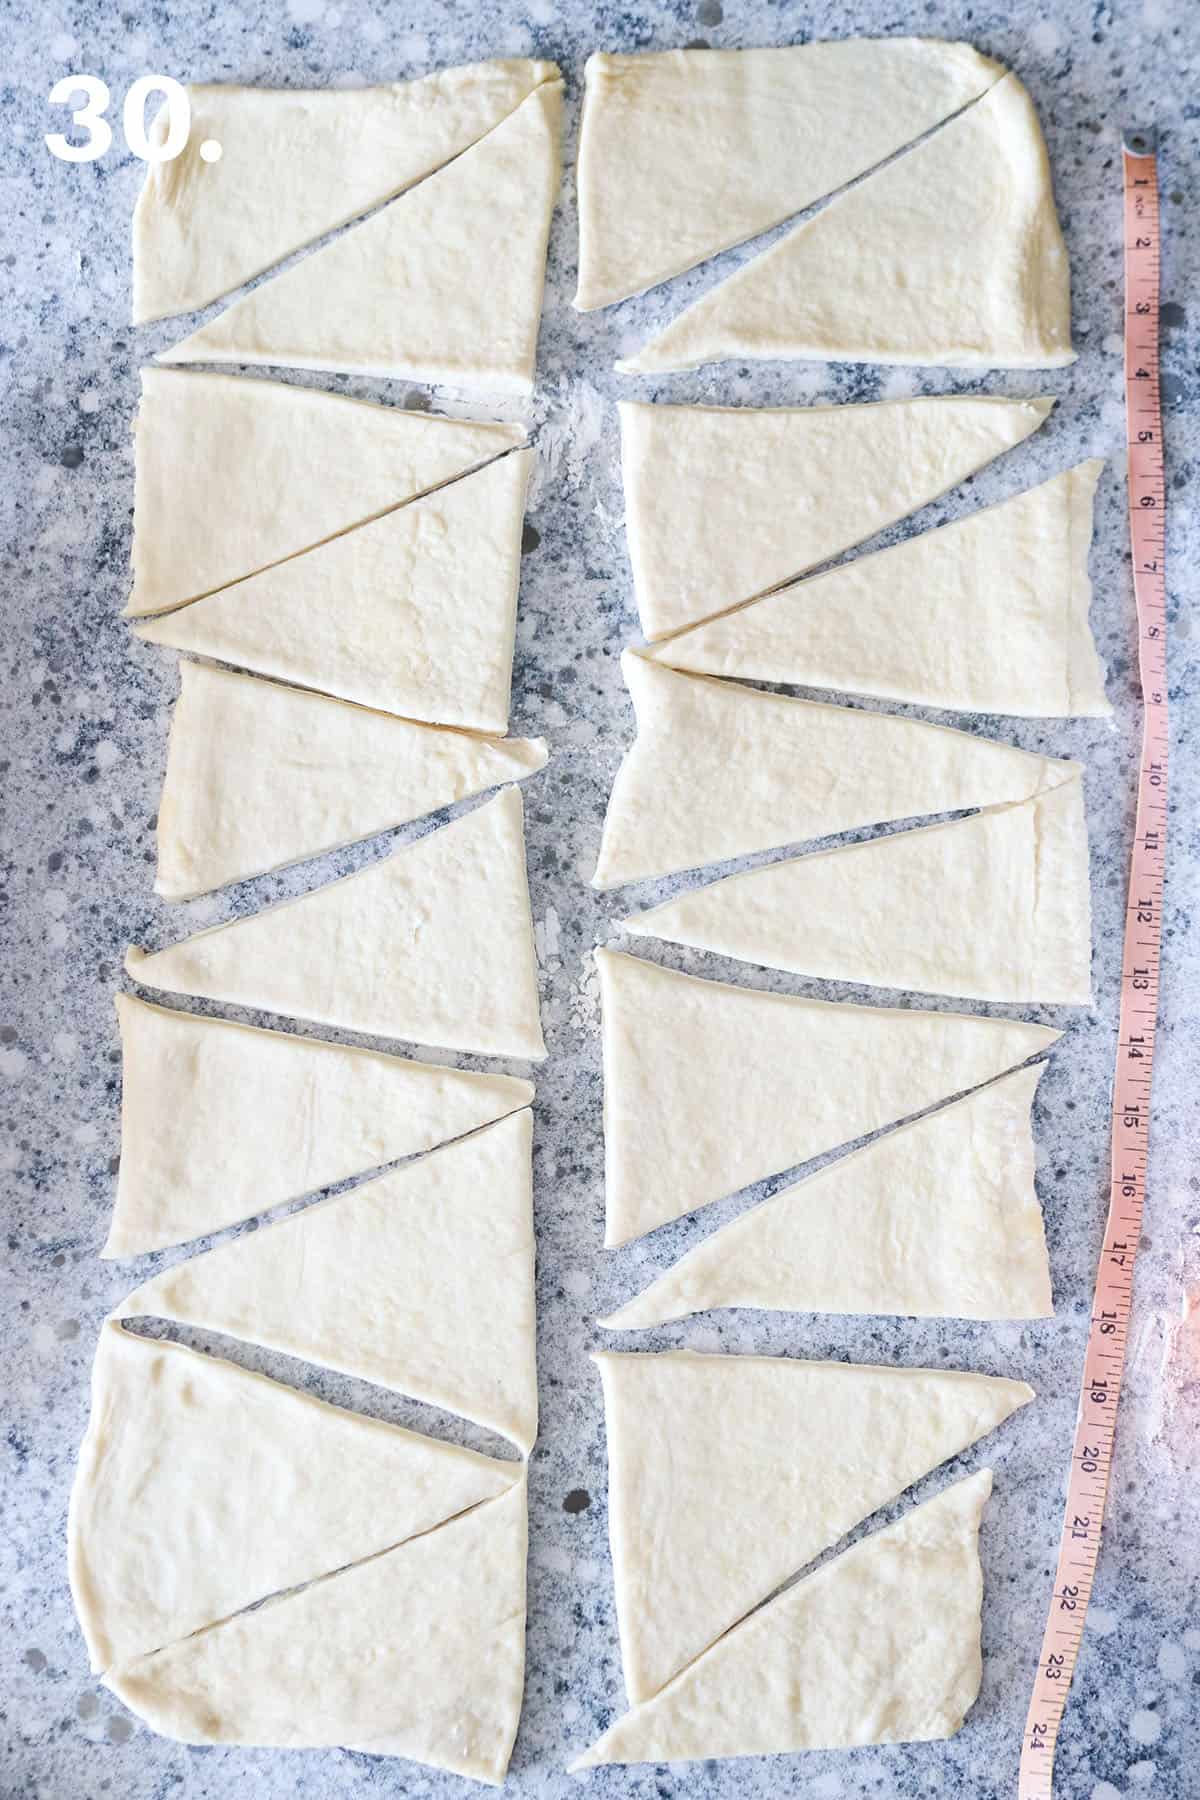 Triangles are cut from the dough.